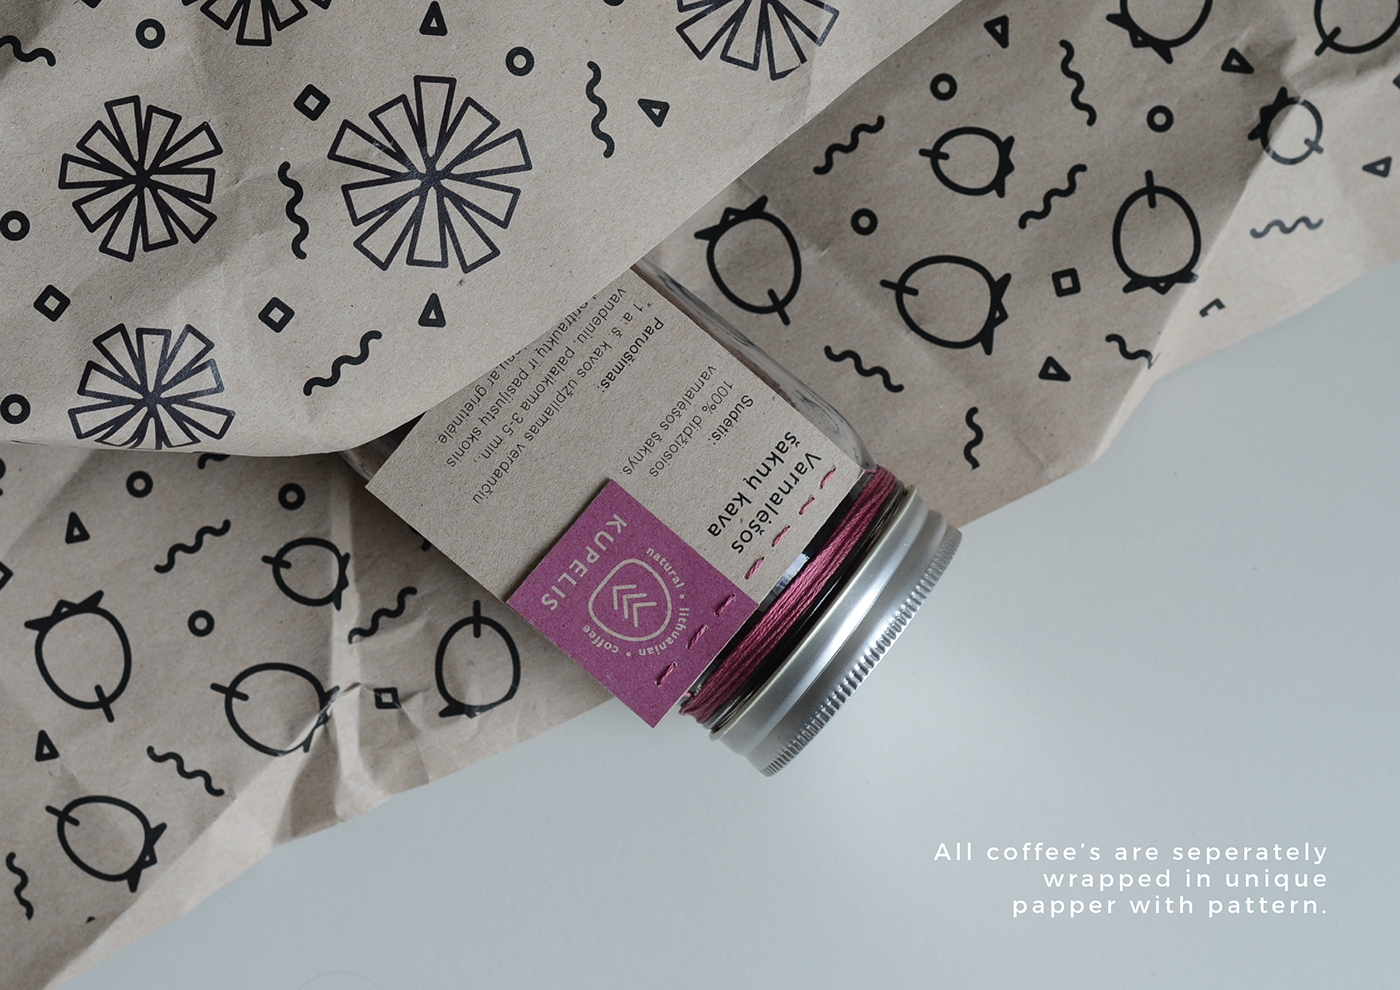 Coffee package coffee package Natural Product lithuania branding  Ecology recycling pattern jar